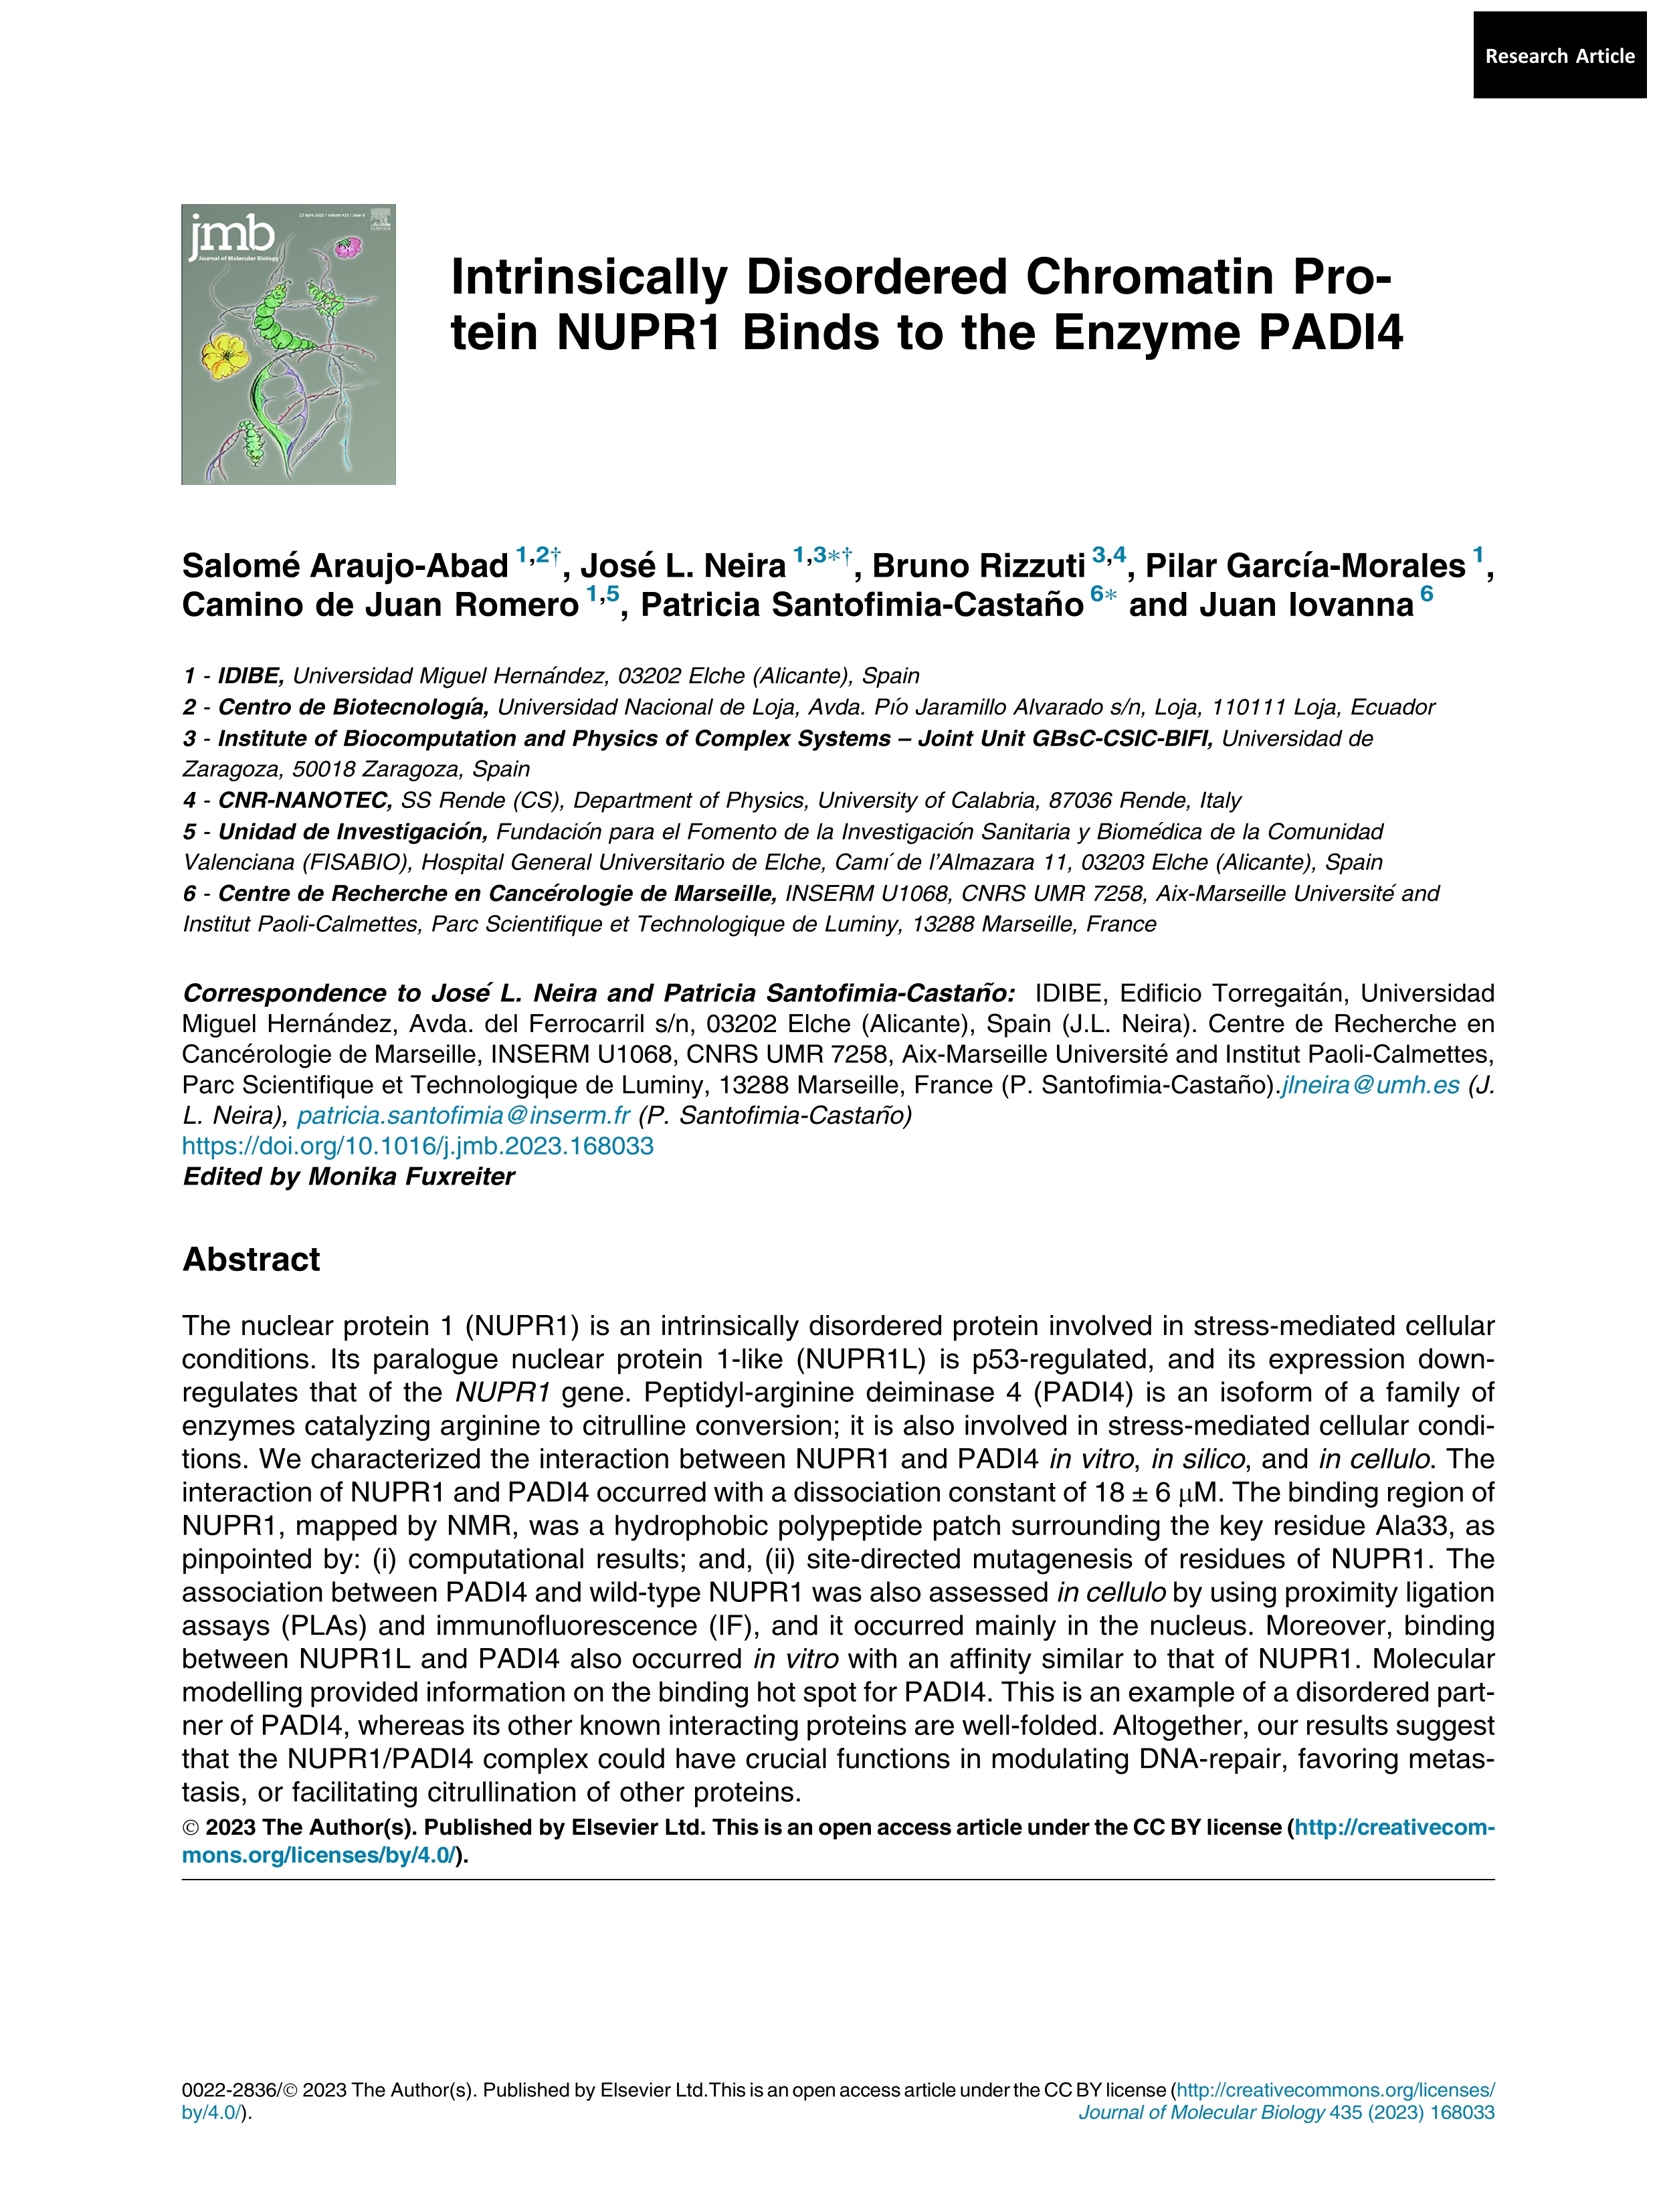 Intrinsically disordered chromatin protein NUPR1 binds to the enzyme PADI4